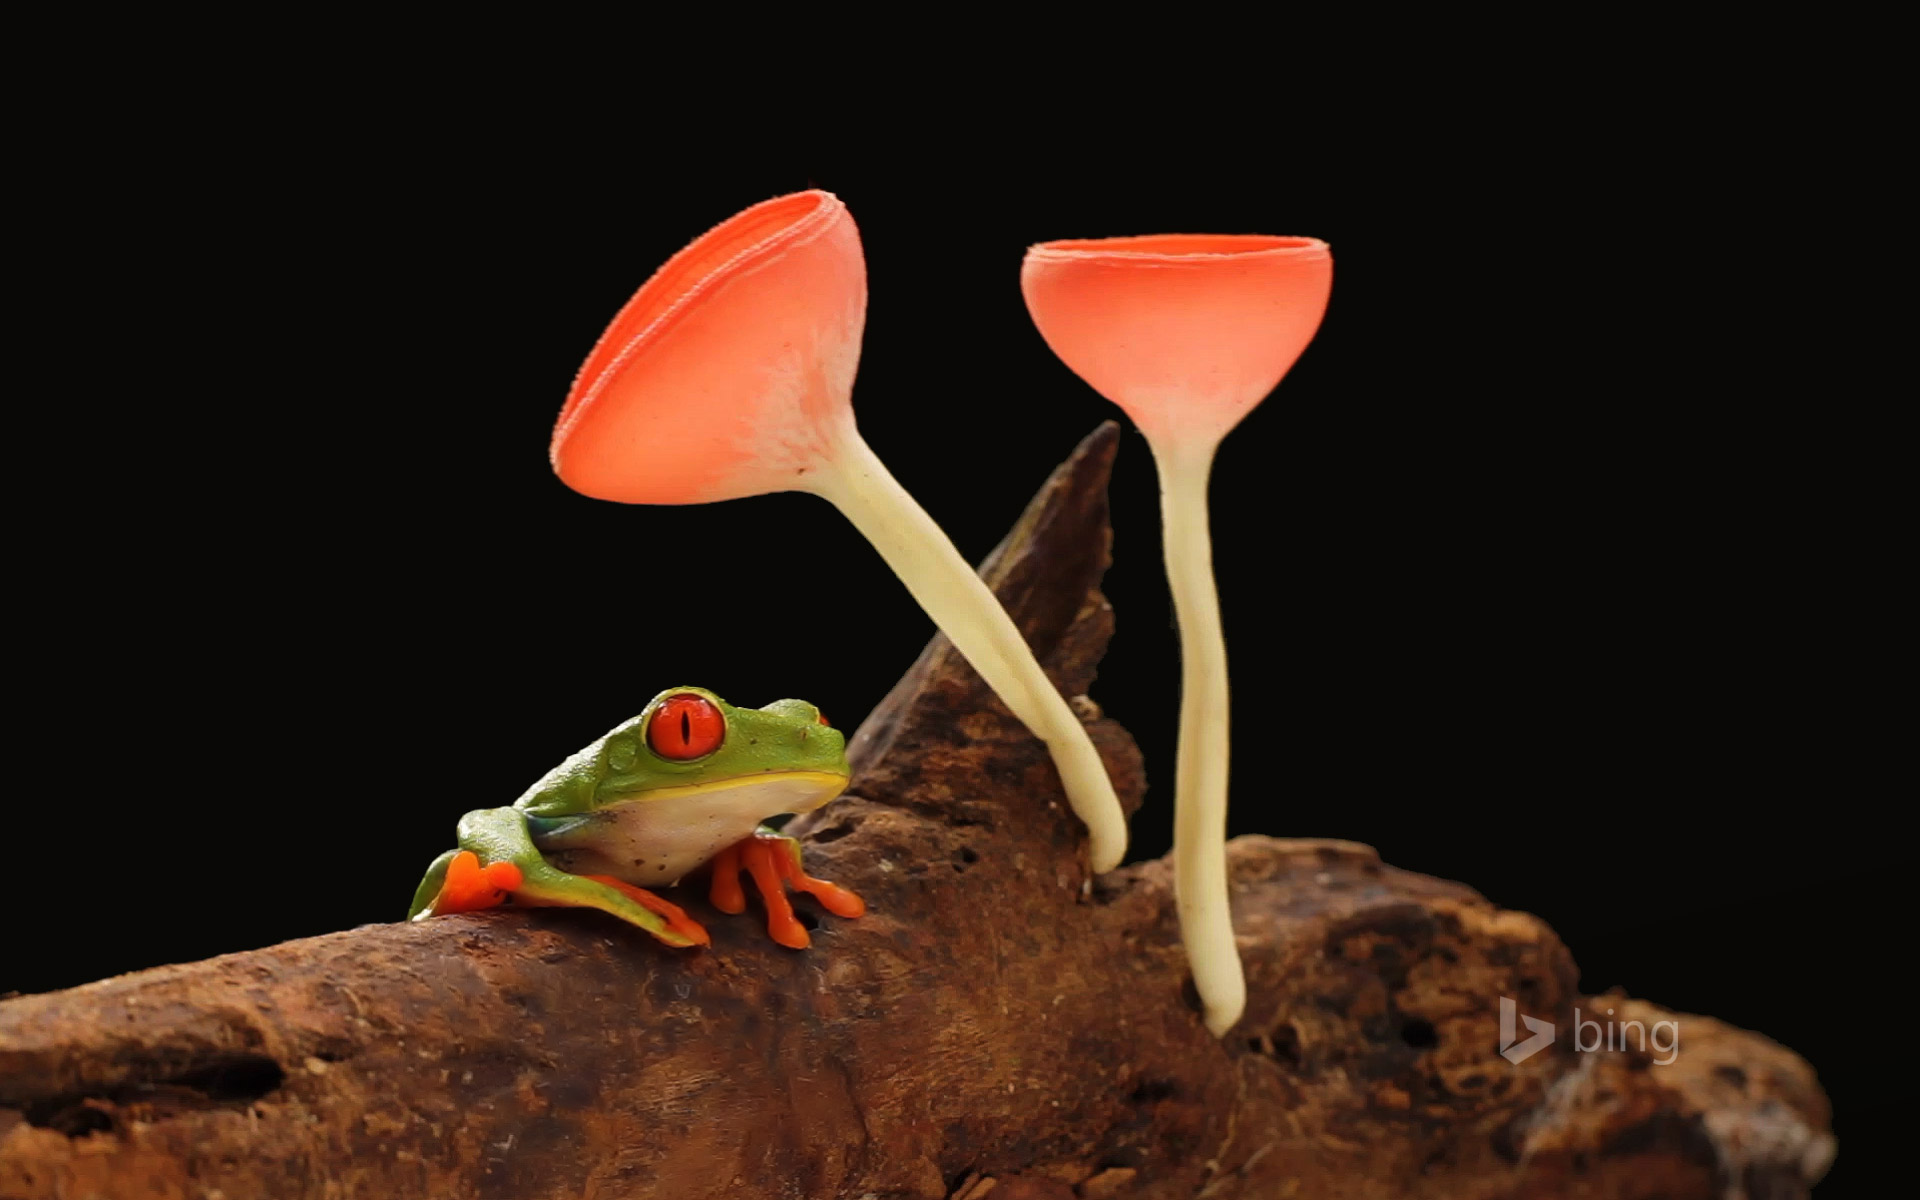 Red-eyed Or Gaudy Leaf Frog With Mushrooms - New Bing , HD Wallpaper & Backgrounds